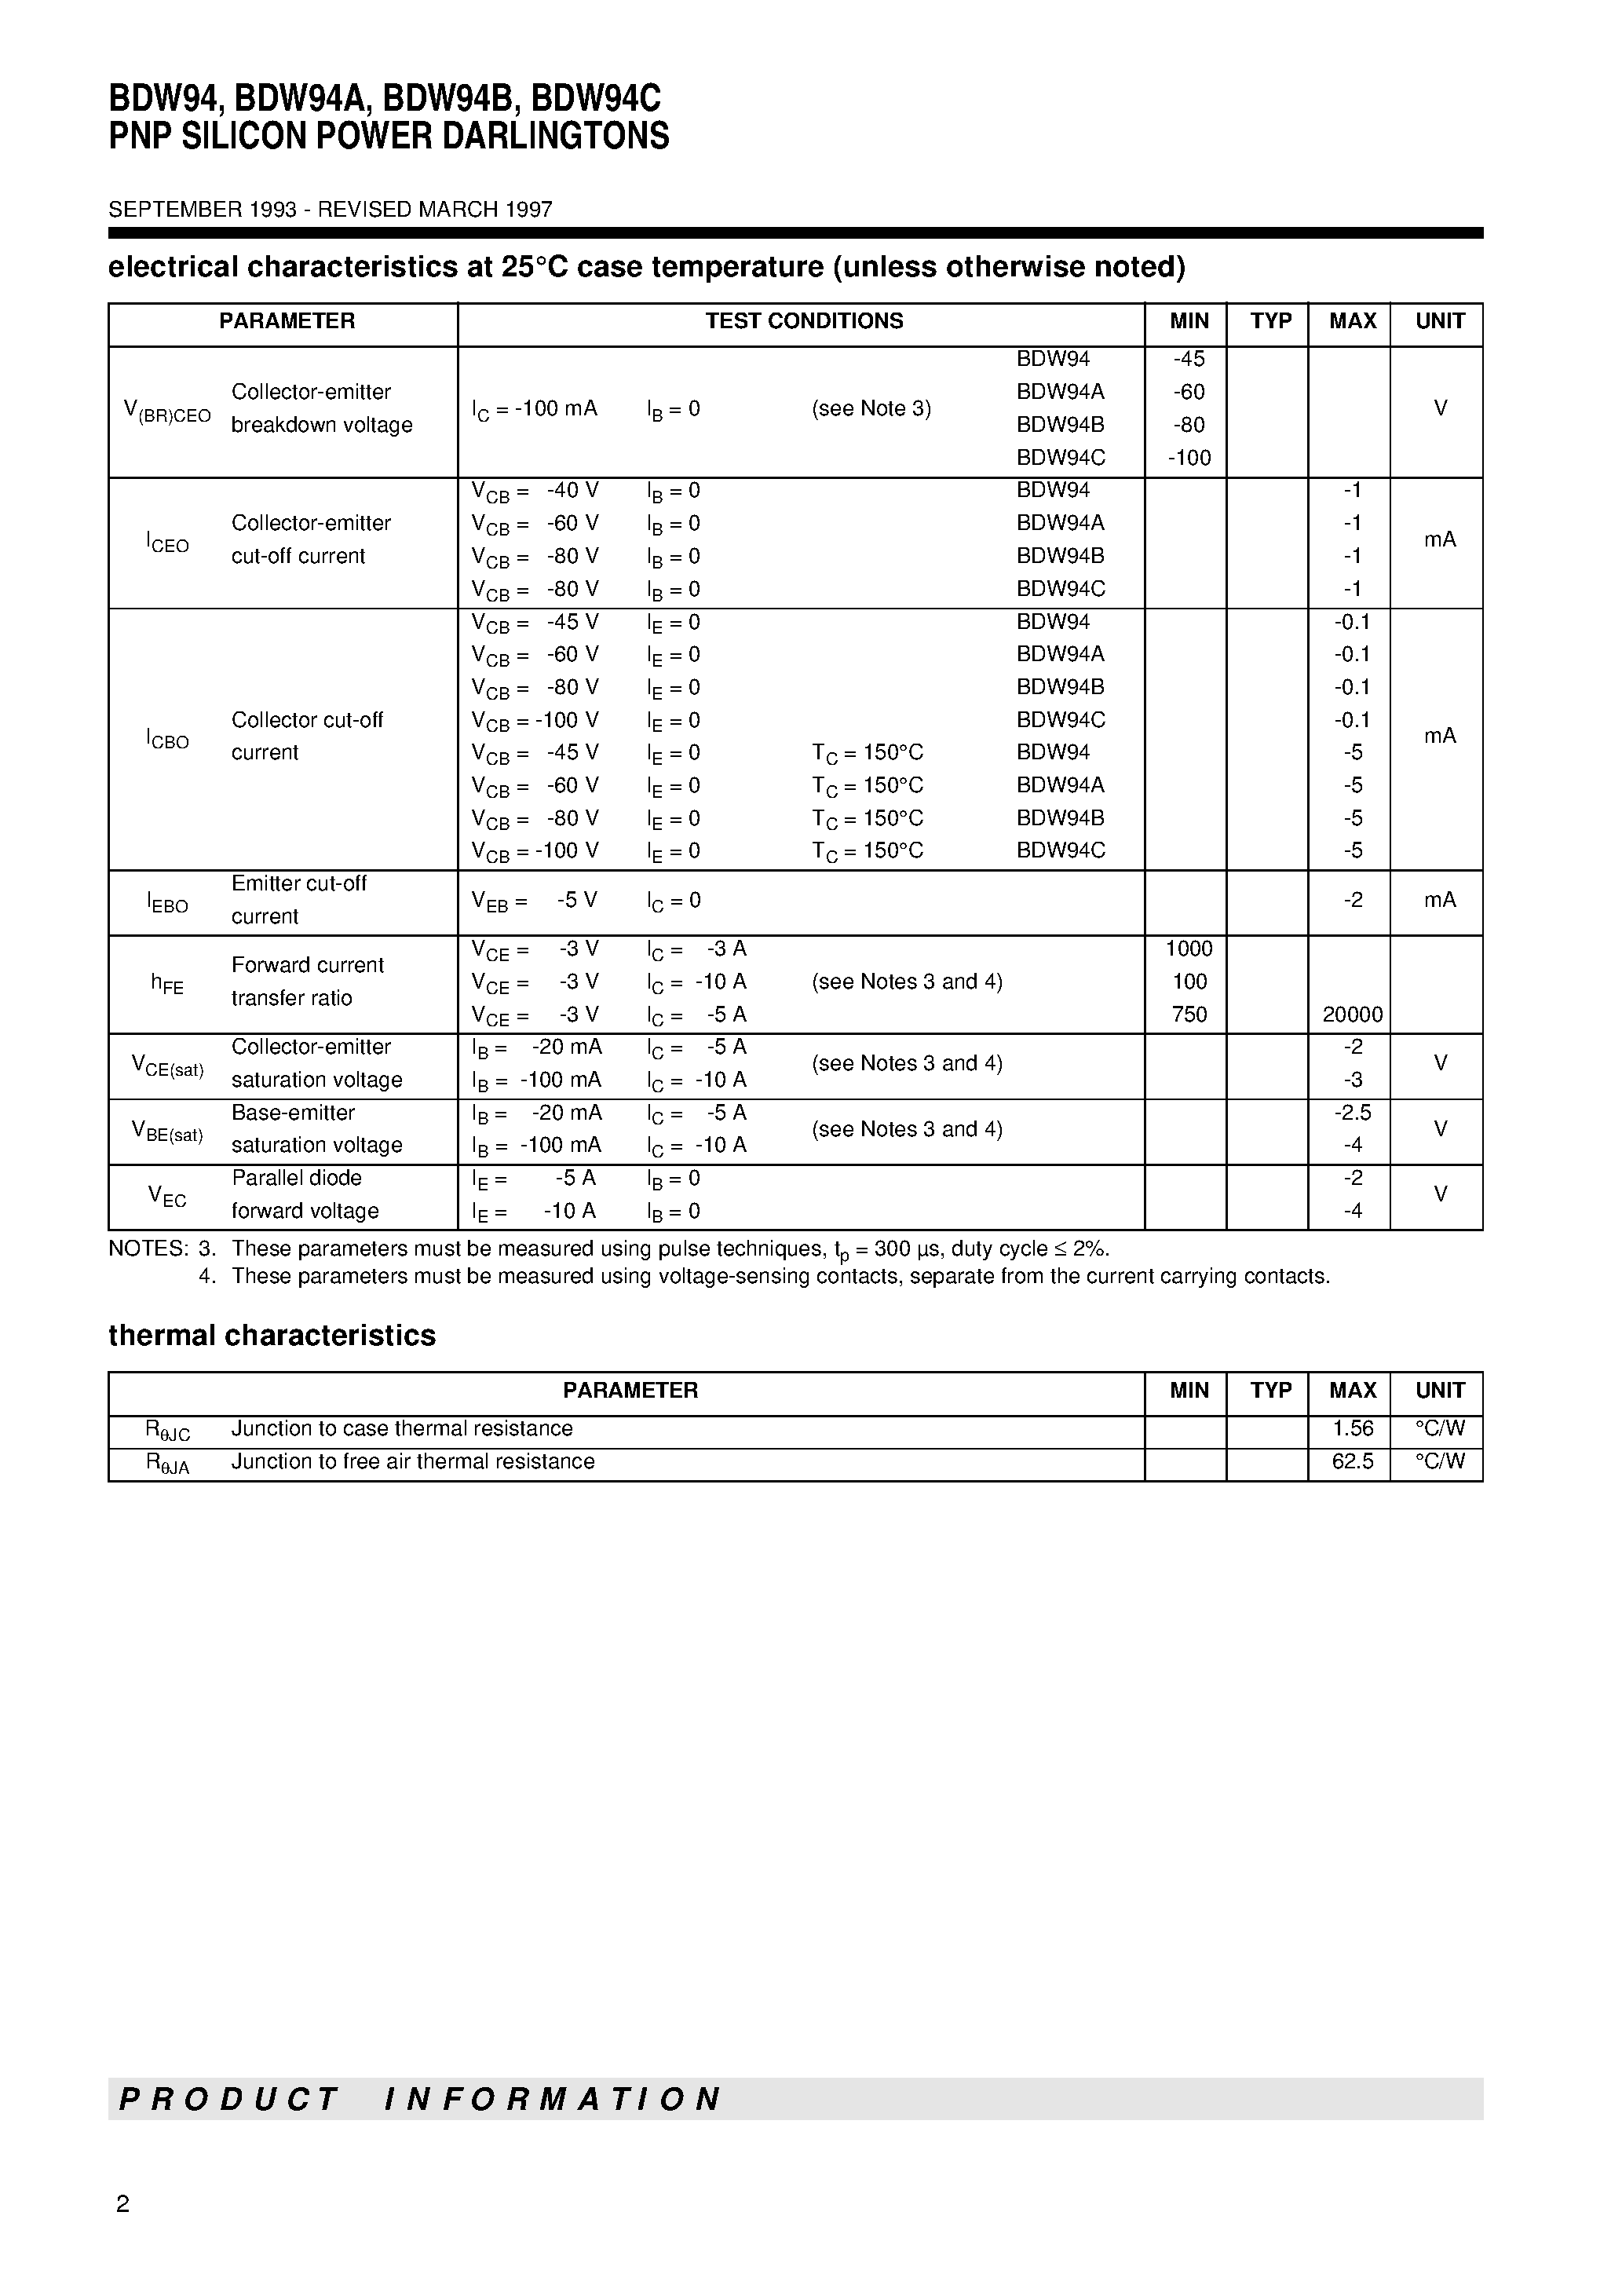 Datasheet BDW94C - PNP SILICON POWER DARLINGTONS page 2